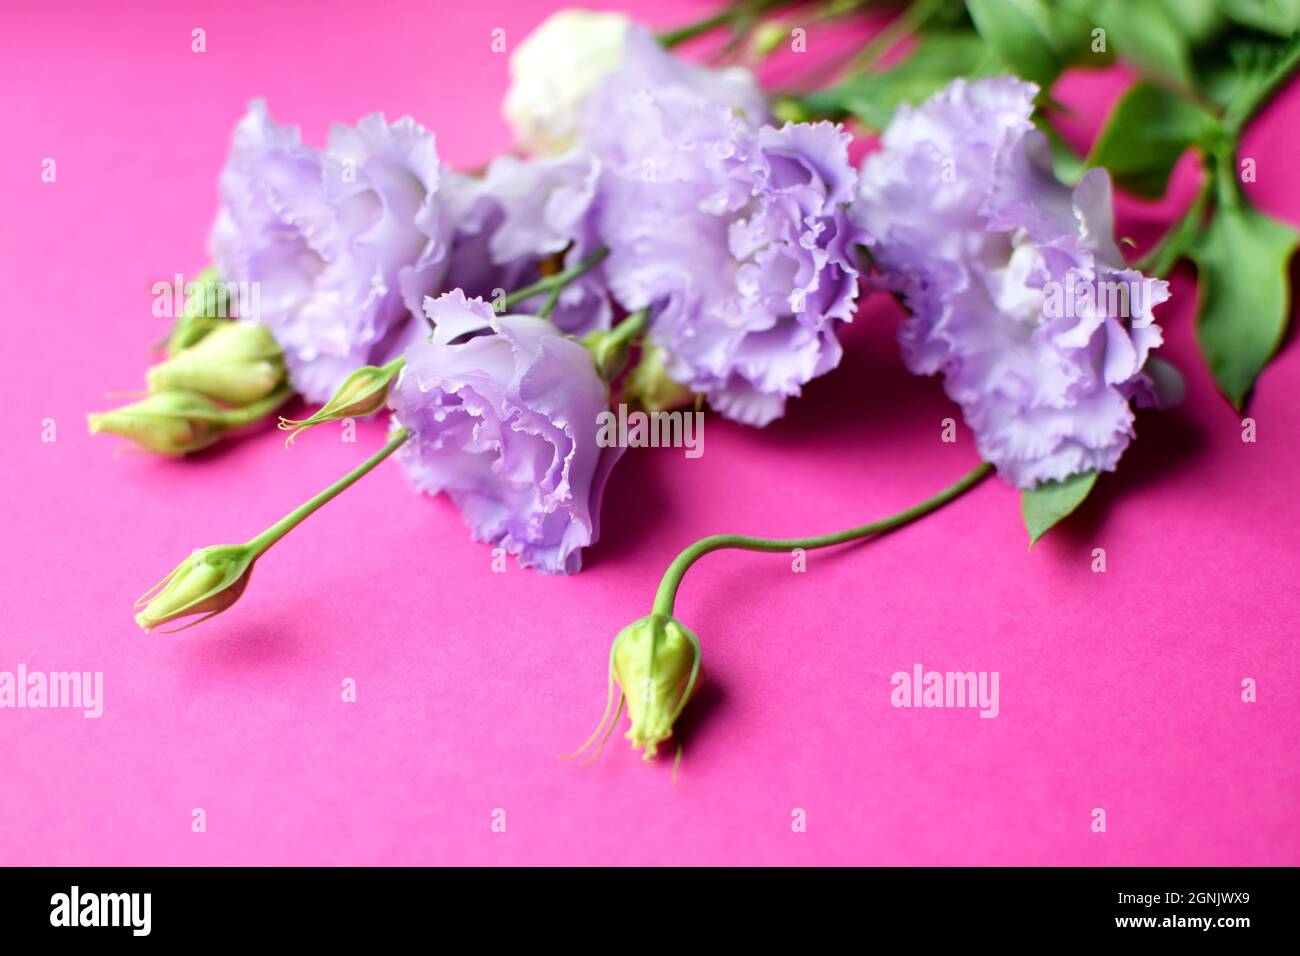 Beautiful purple eustoma flowers (lisianthus) in full bloom with buds leaves. Bouquet of flowers on fuchsia  background. Stock Photo